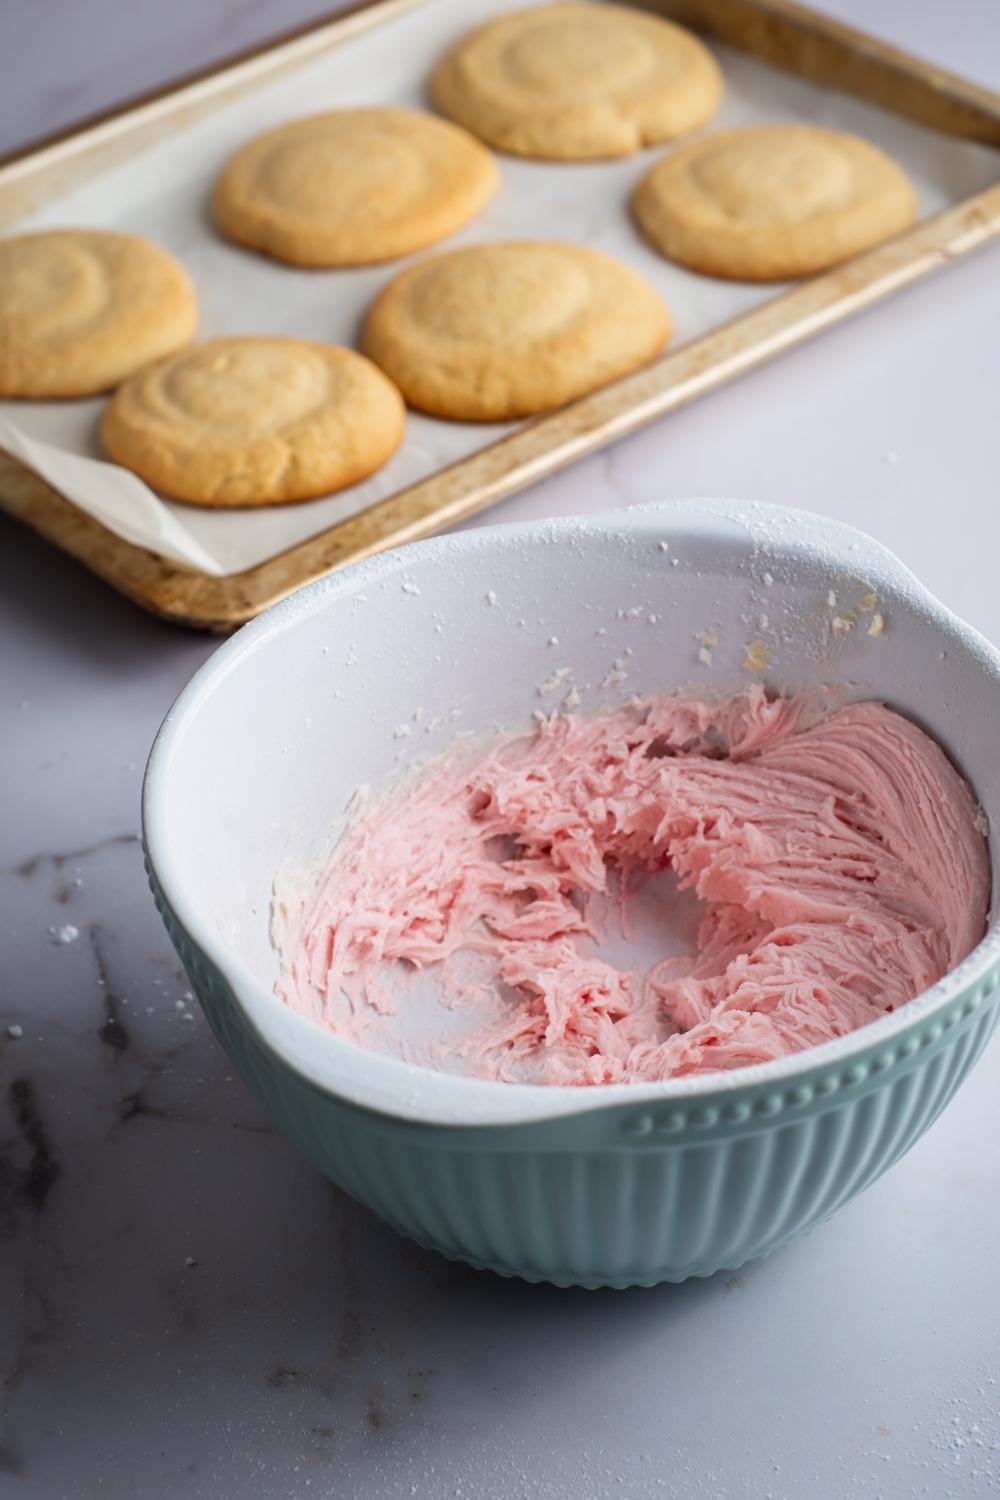 A large bowl sits on a countertop with pink icing. There is a baking sheet lined with parchment paper holding six sugar cookies.